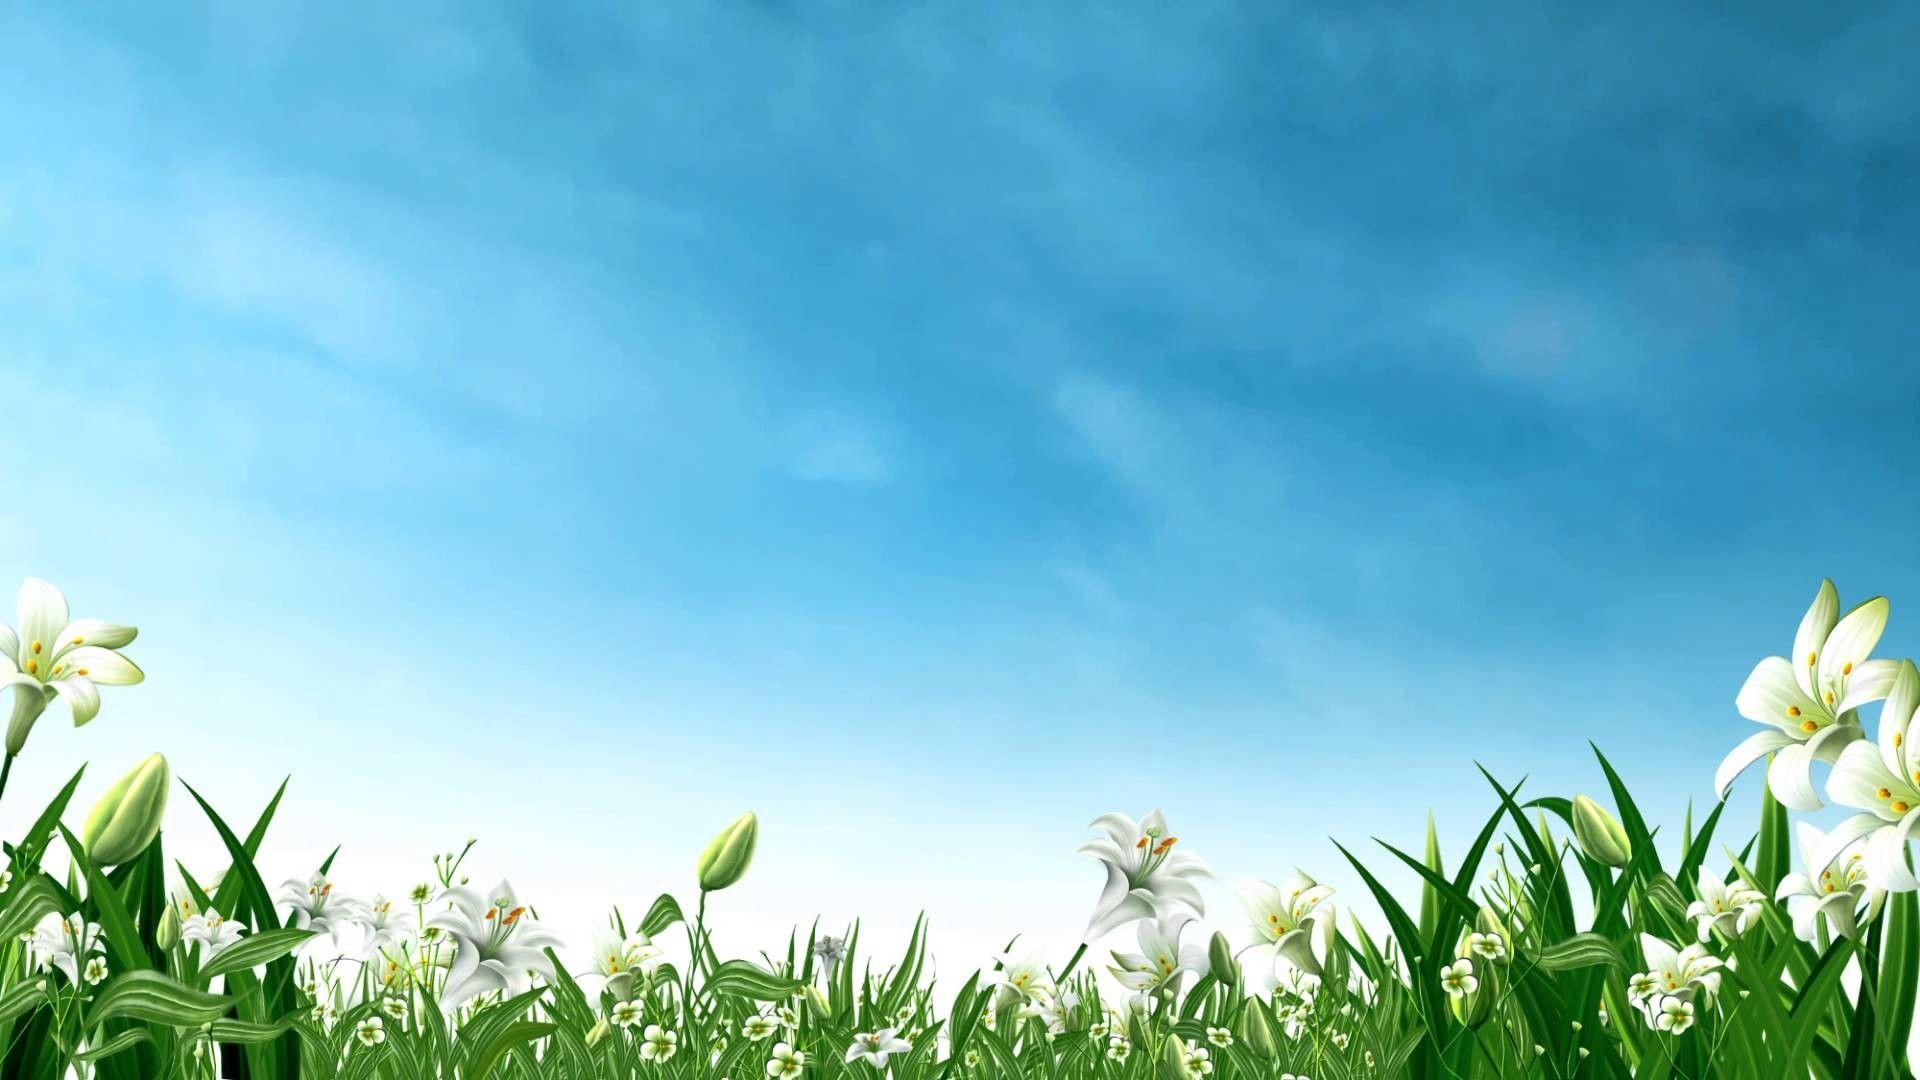 Background image landscapeDownload free awesome wallpaper